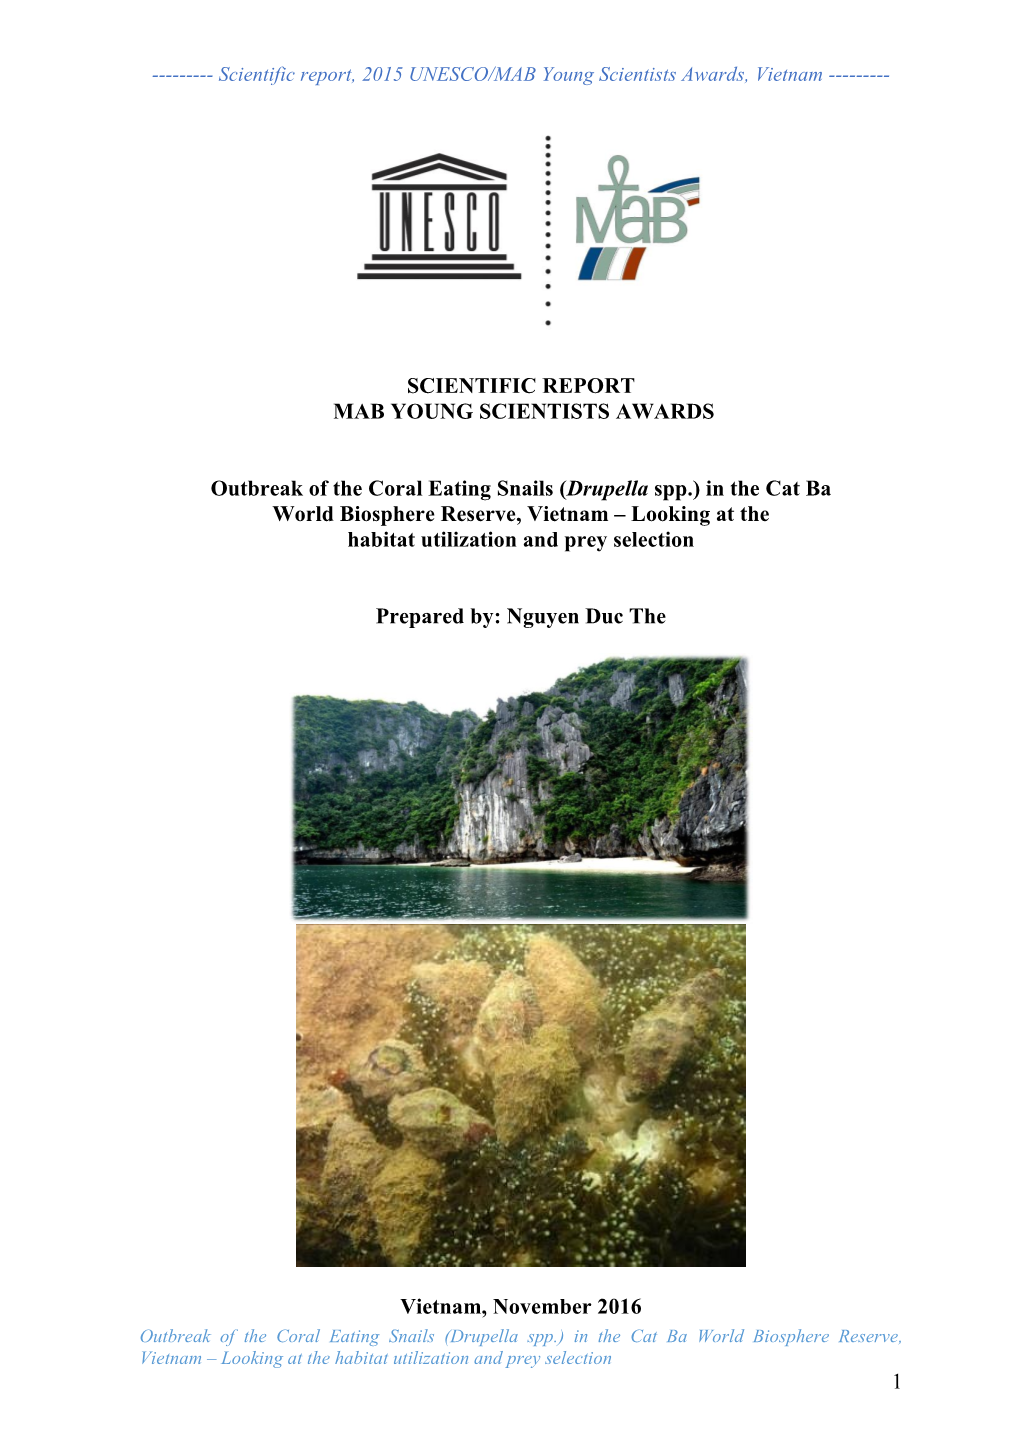 Outbreak of the Coral Eating Snails (Drupella Spp.) in the Cat Ba World Biosphere Reserve, Vietnam – Looking at the Habitat Utilization and Prey Selection